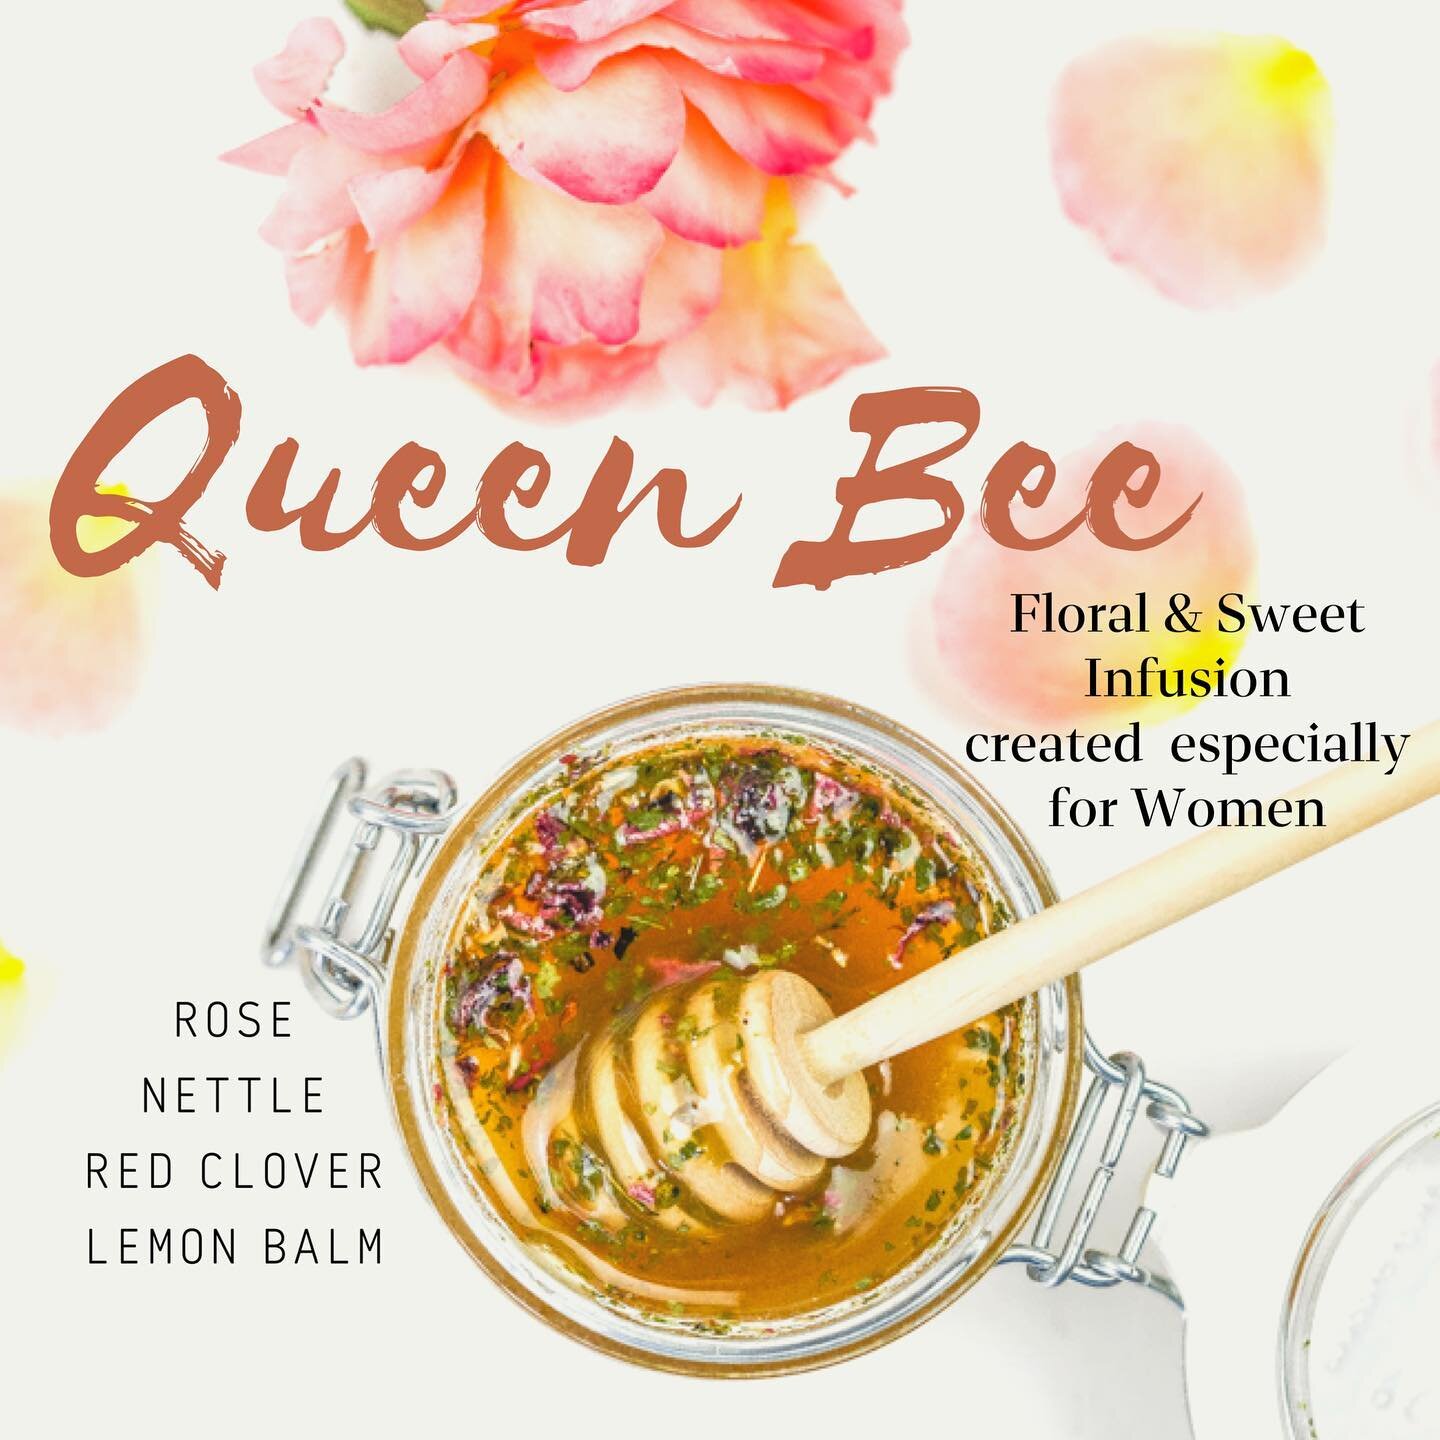 A sweet SALE on our website is about to launch soon... Get ready all you Queen Bee&rsquo;s!!! #womenshistorymonth #arielshoneyinfusions #womensupportingwomen #womenunbiz #madeinvermont #vermontliving #womenpreneur #vermonthoney #infusedhoney